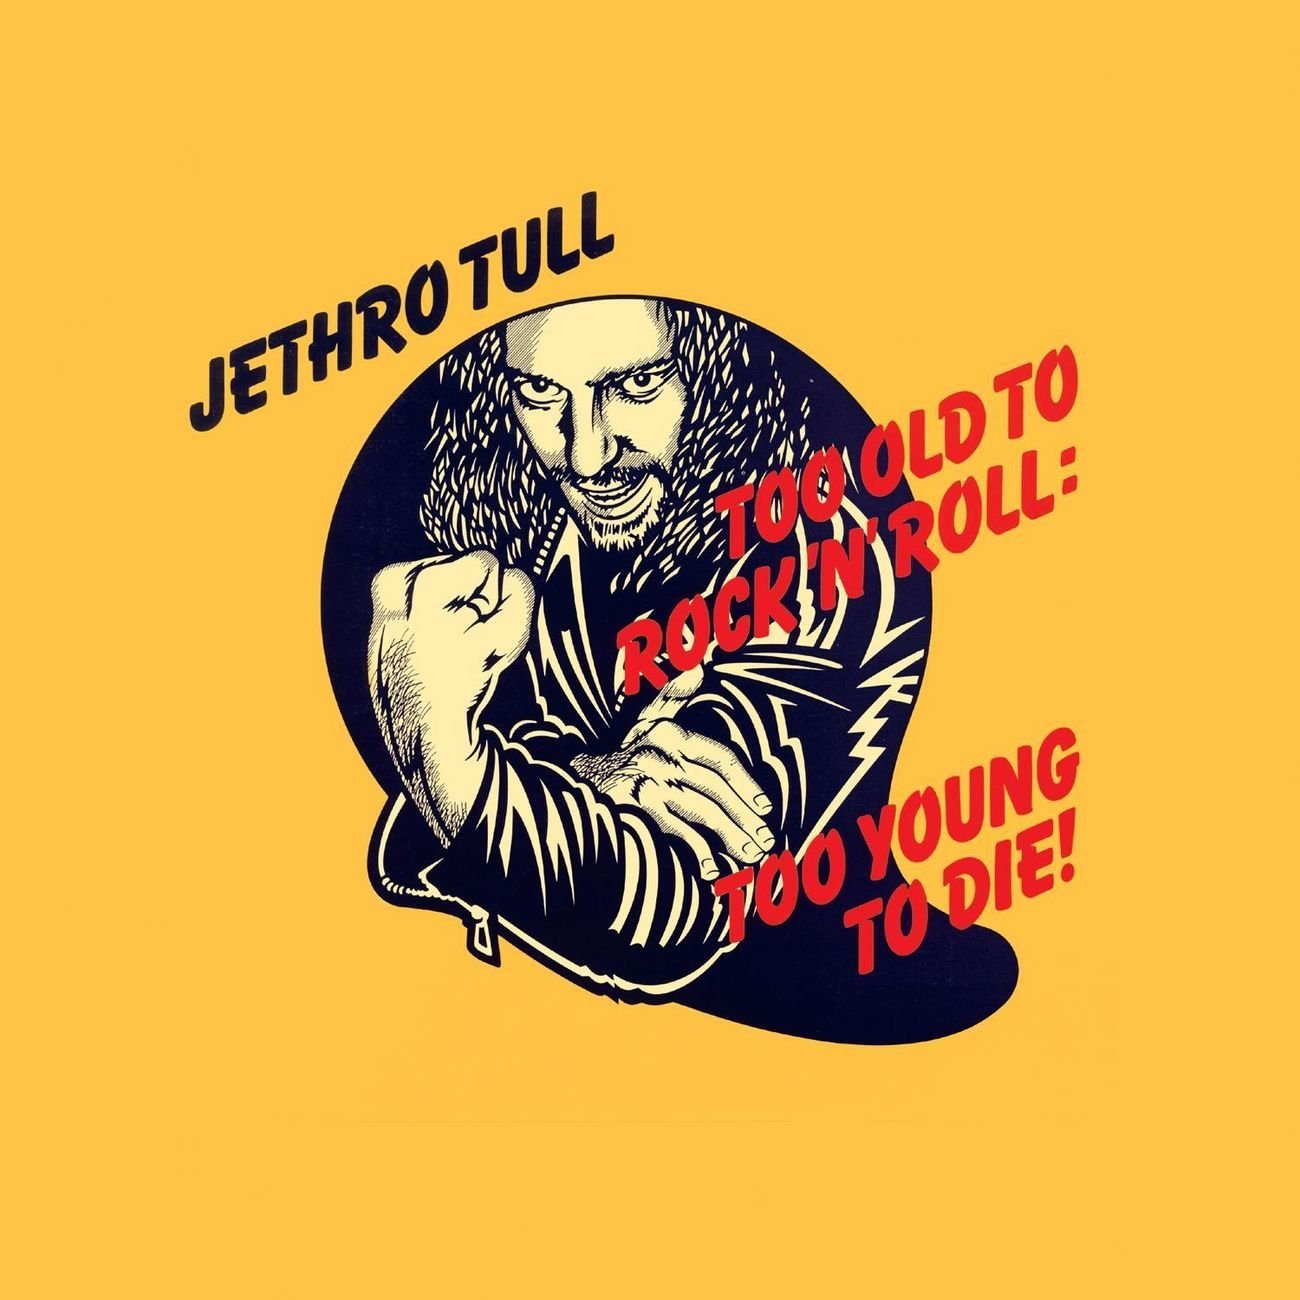 Jethro Tull - Too Old To Rck n Roll ... Too Young To Die [2015] DVD 24-96